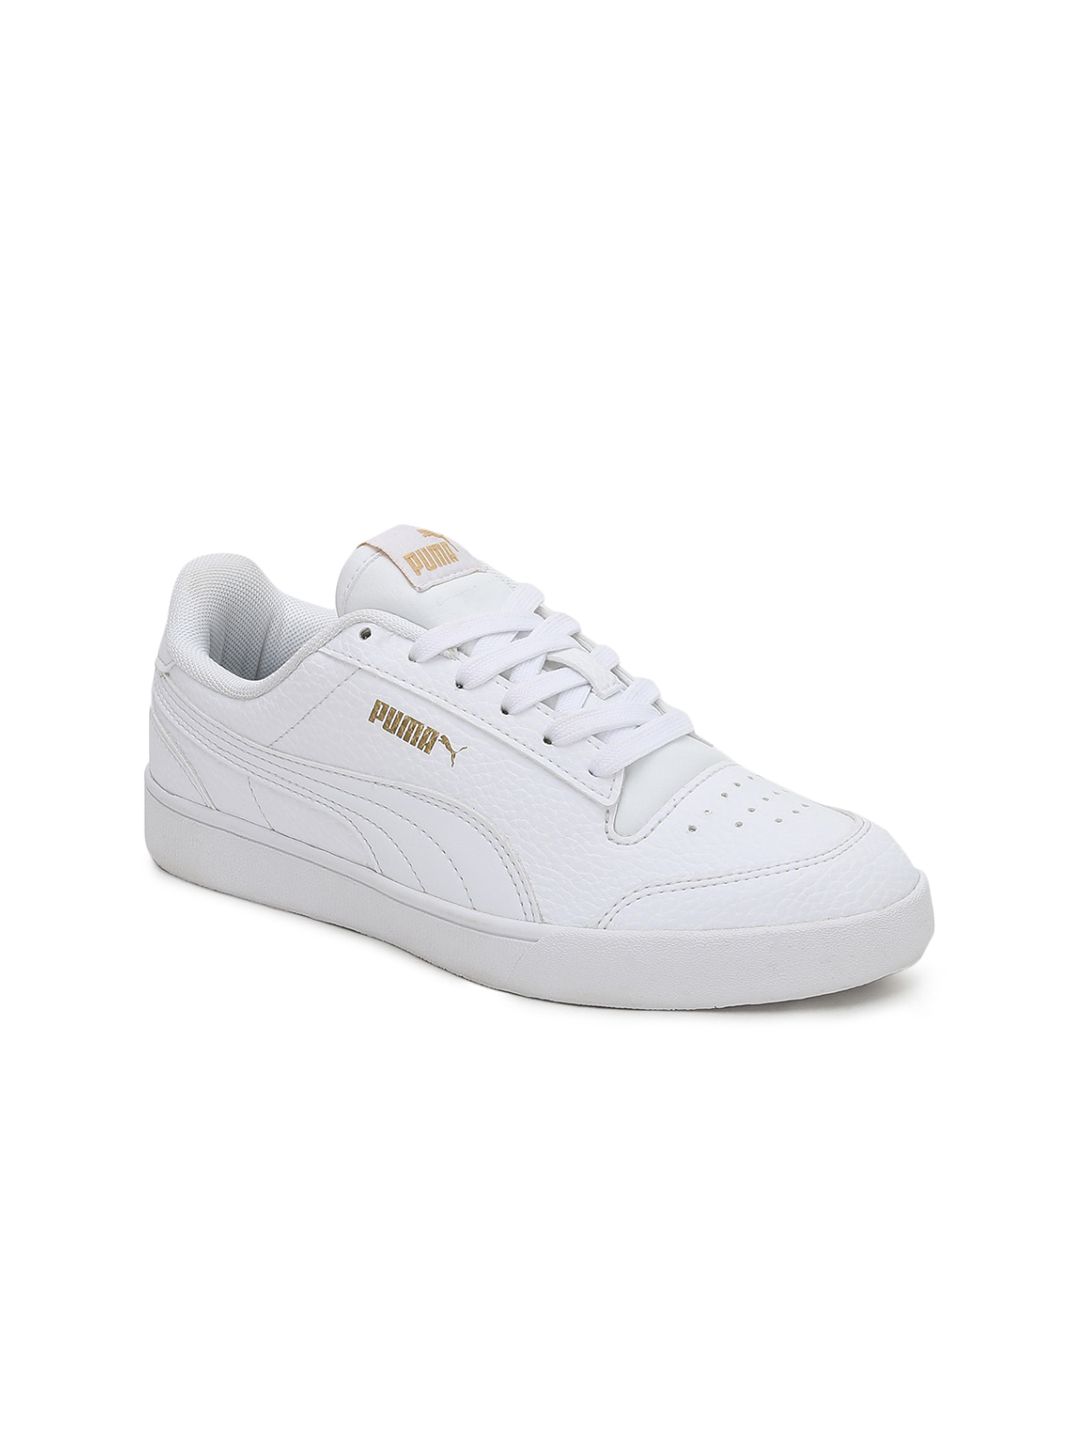 Puma Women White Shuffle Max Perforations Sneakers Price in India